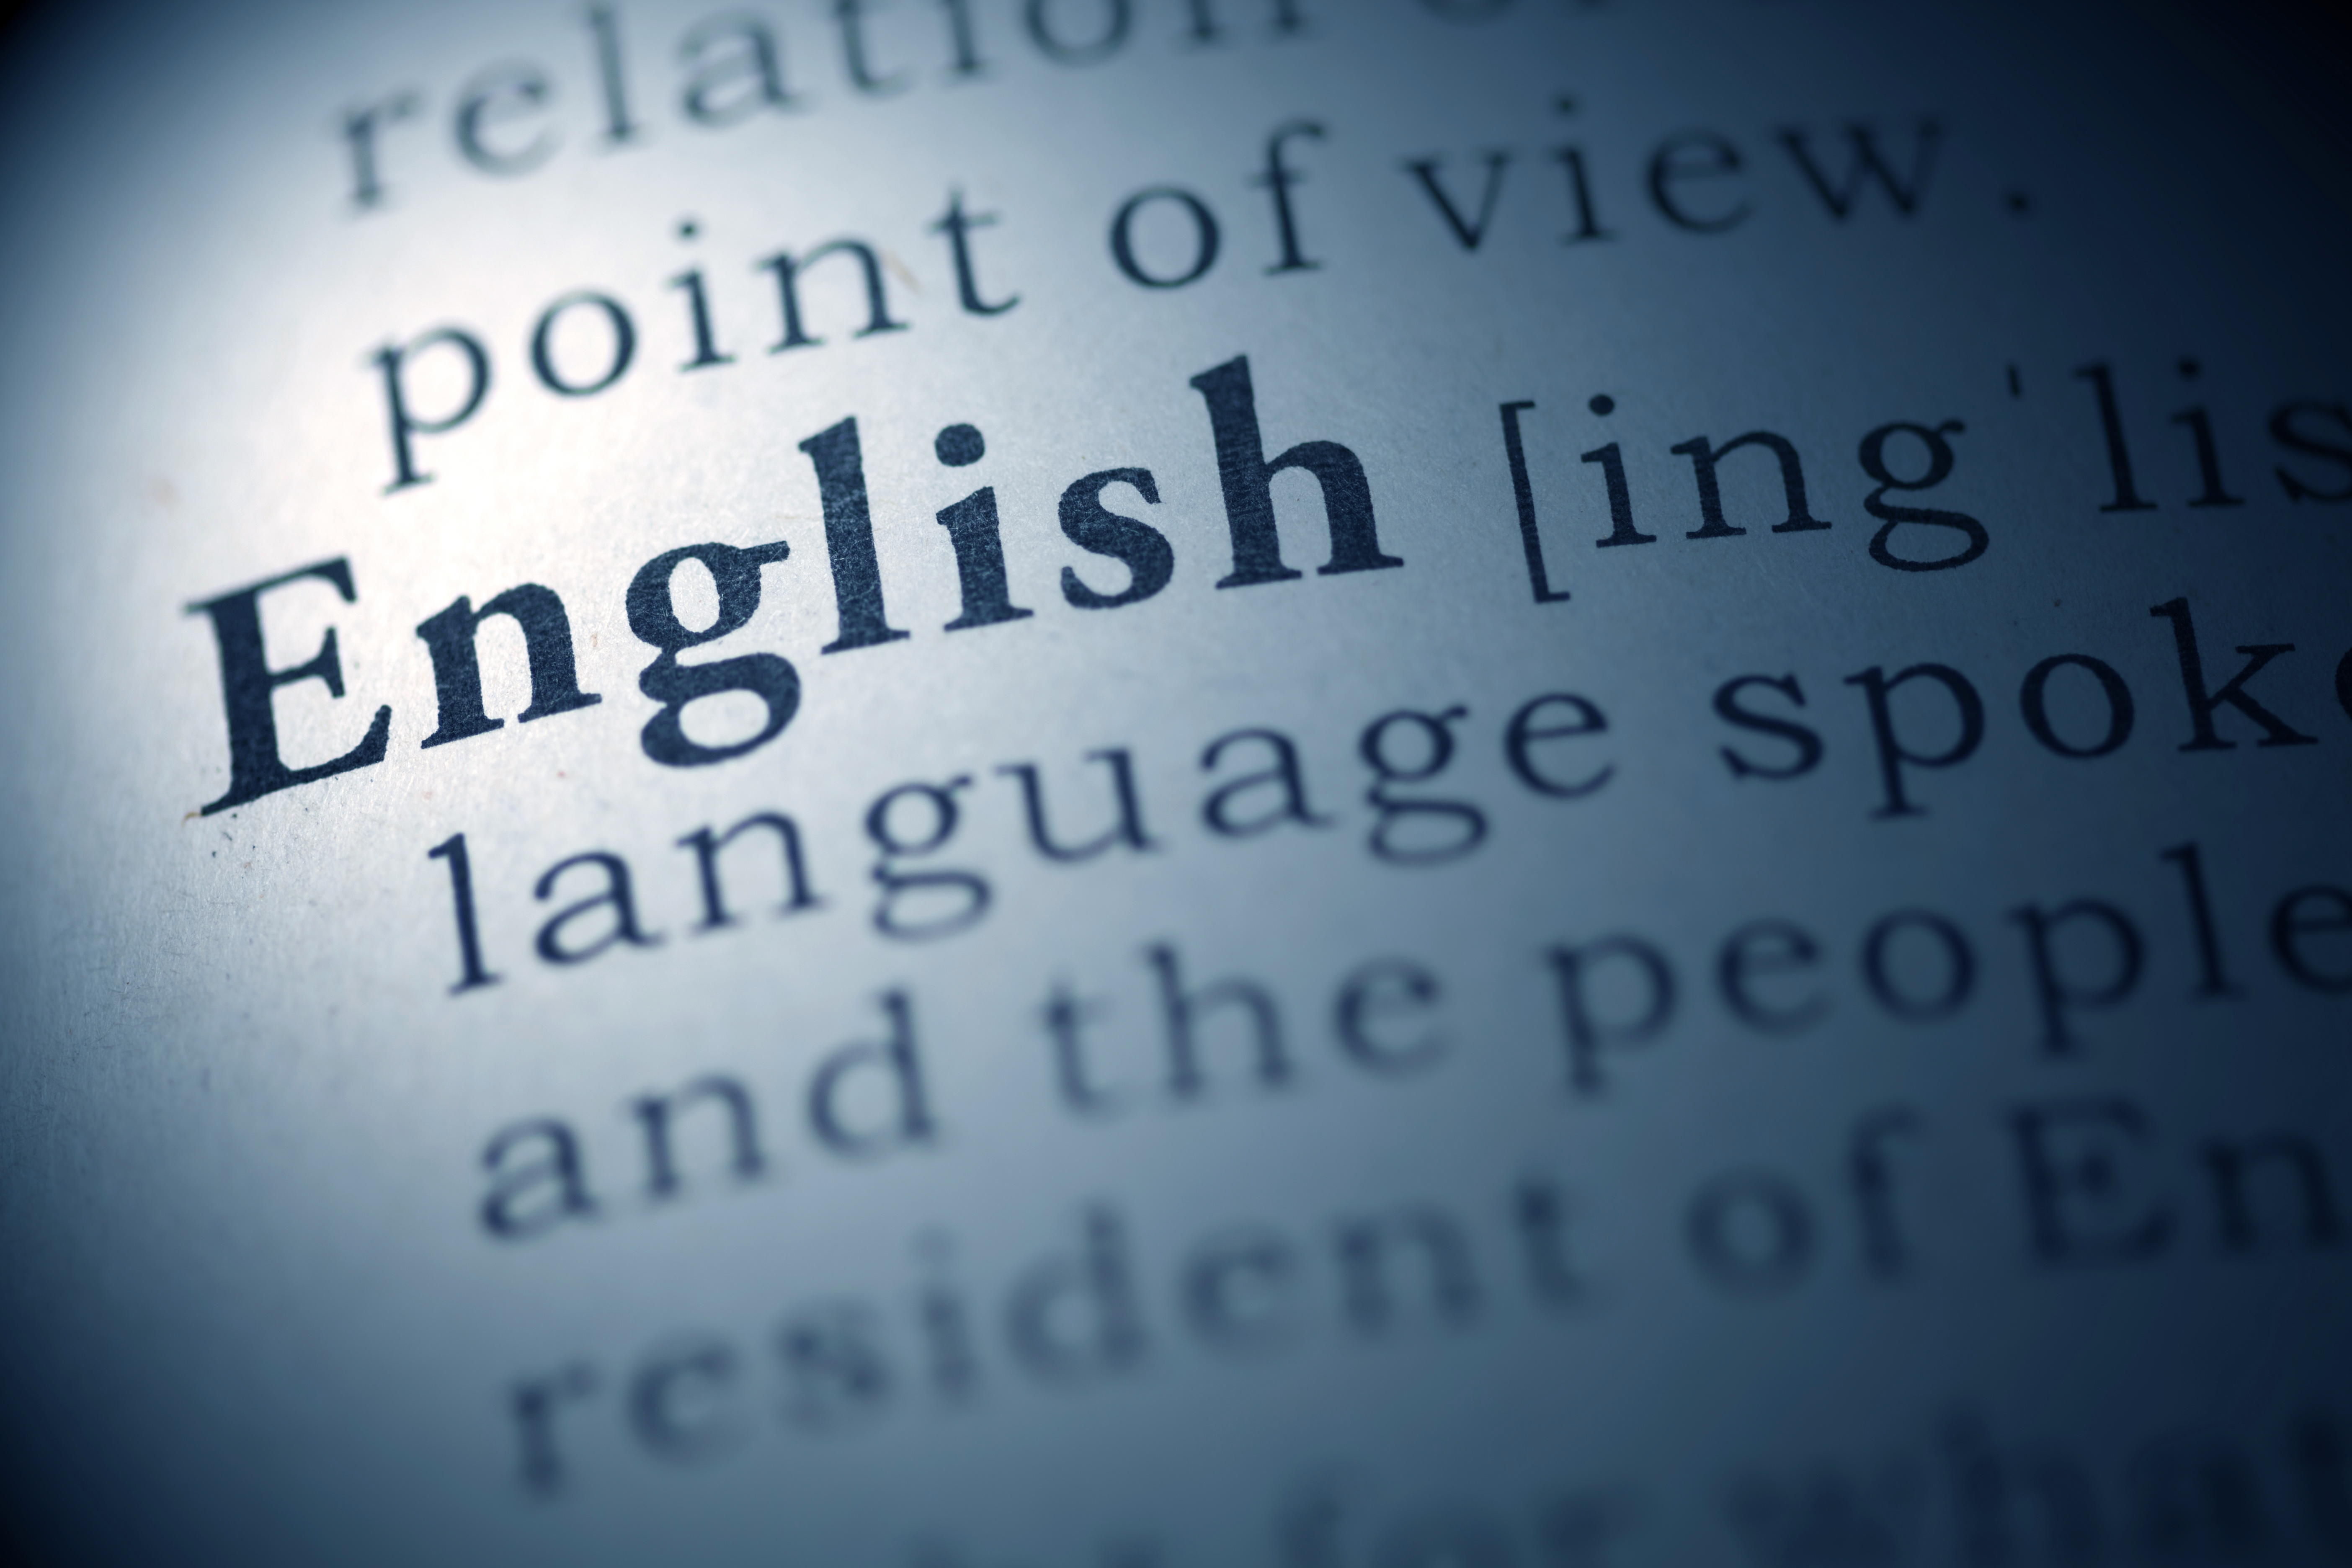 English Language Requirement for Family visas